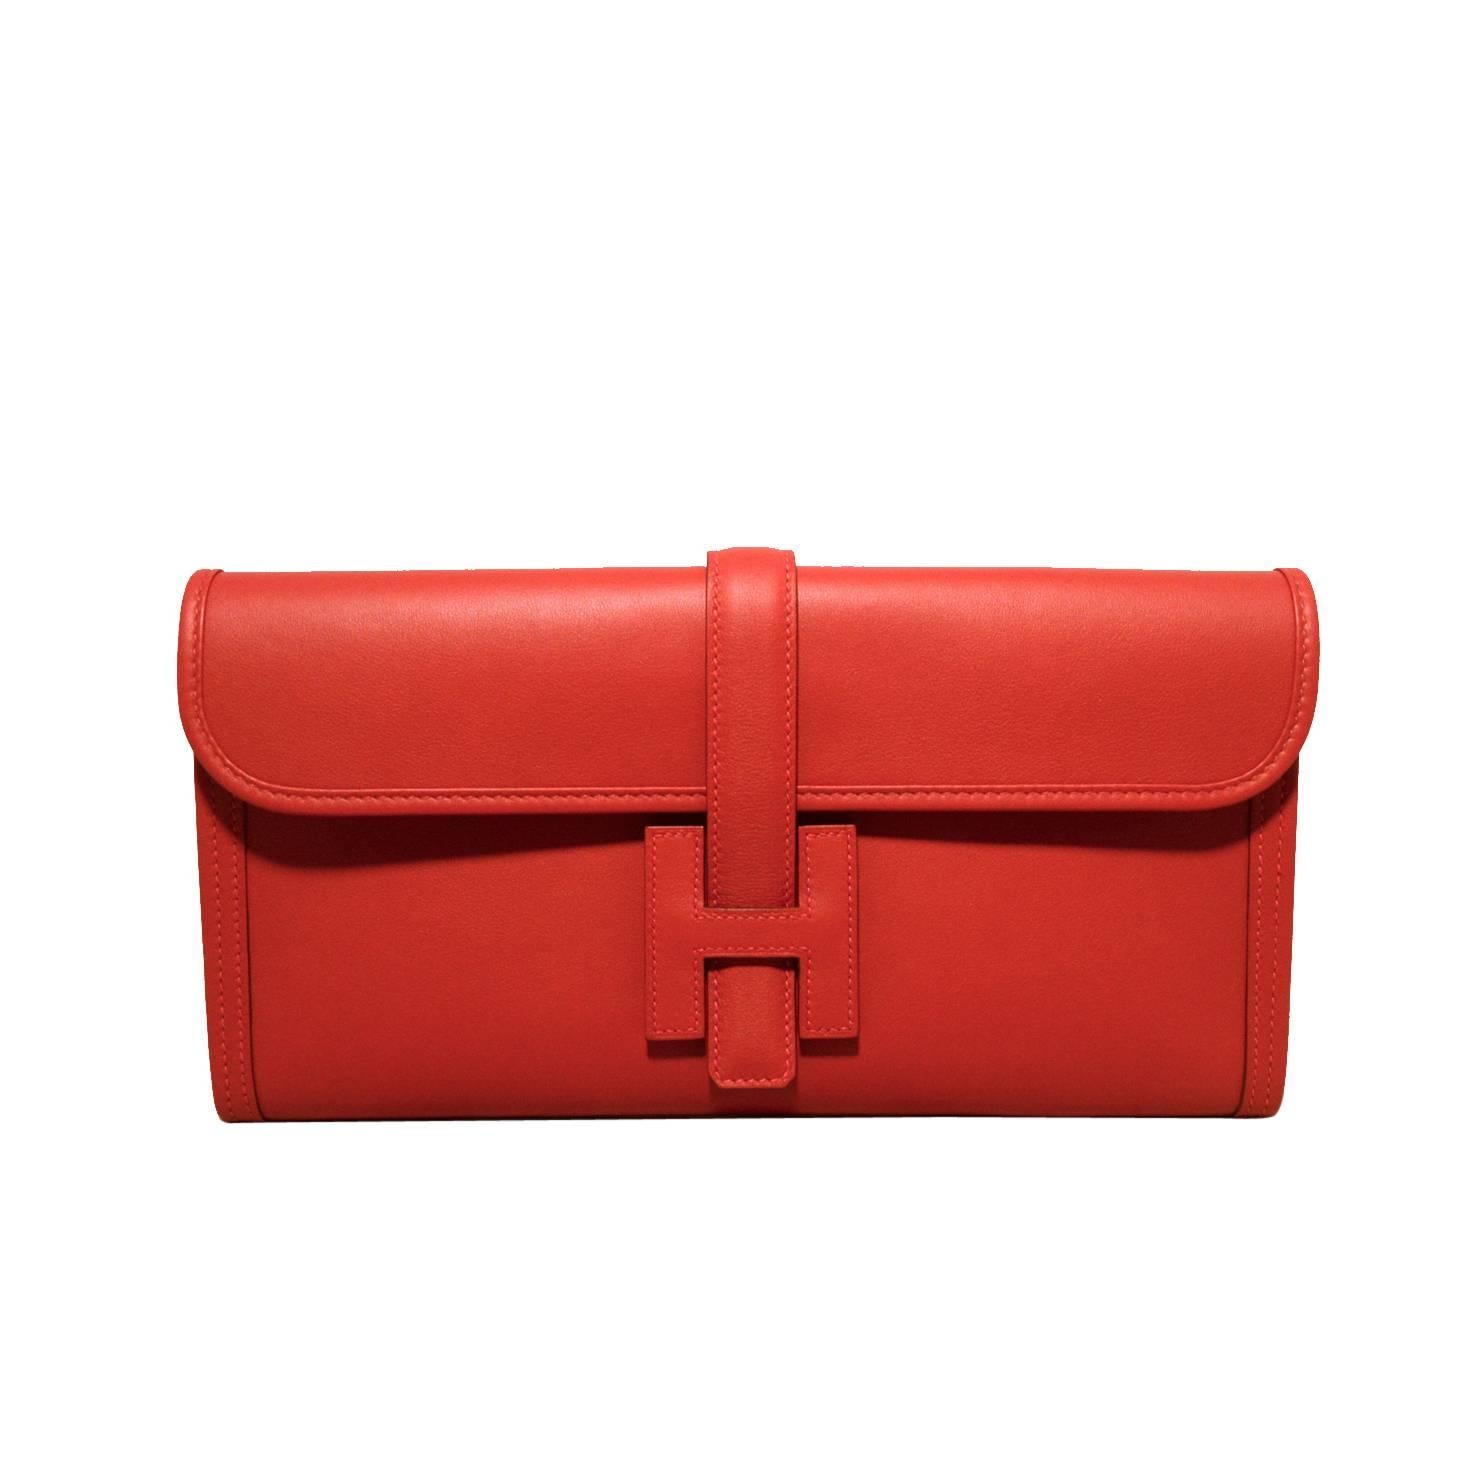 Stunning Hermes Red Jige Swift Leather Clutch